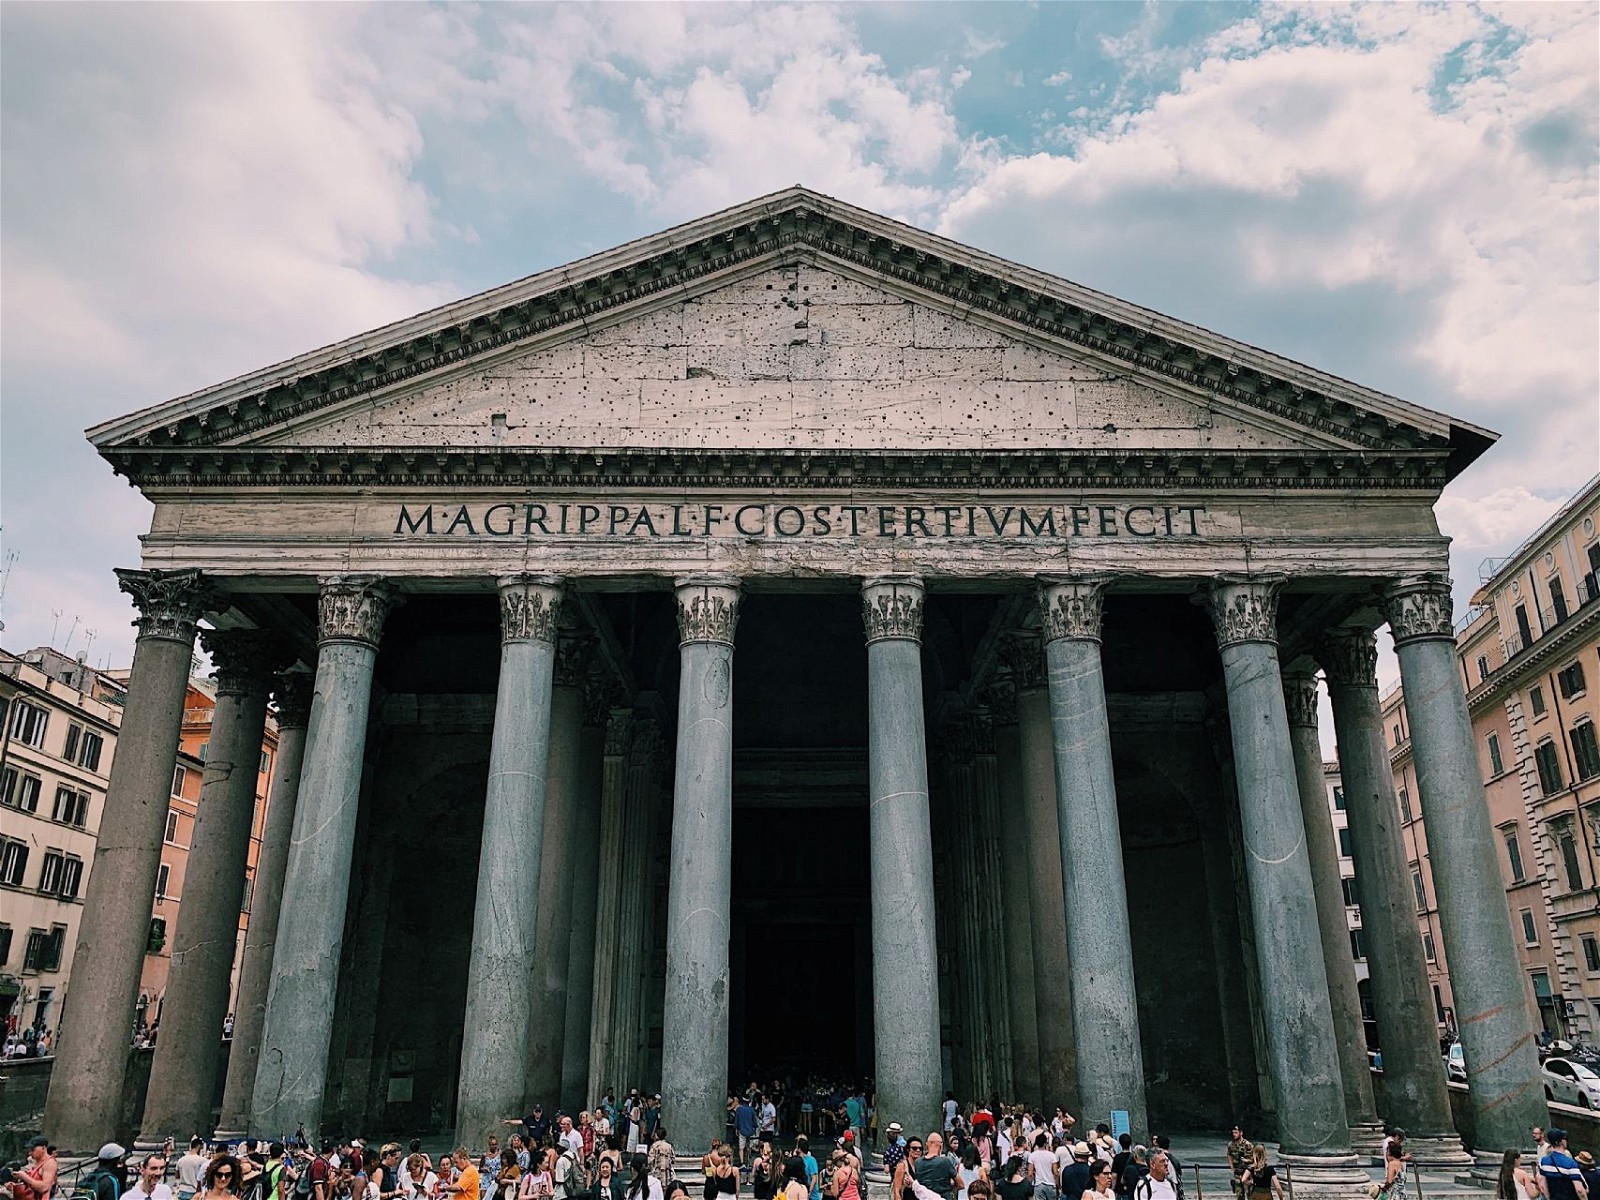 Pantheon: One of the most beautiful ancient structures in Rome is the Pantheon, which was built in 27 BC